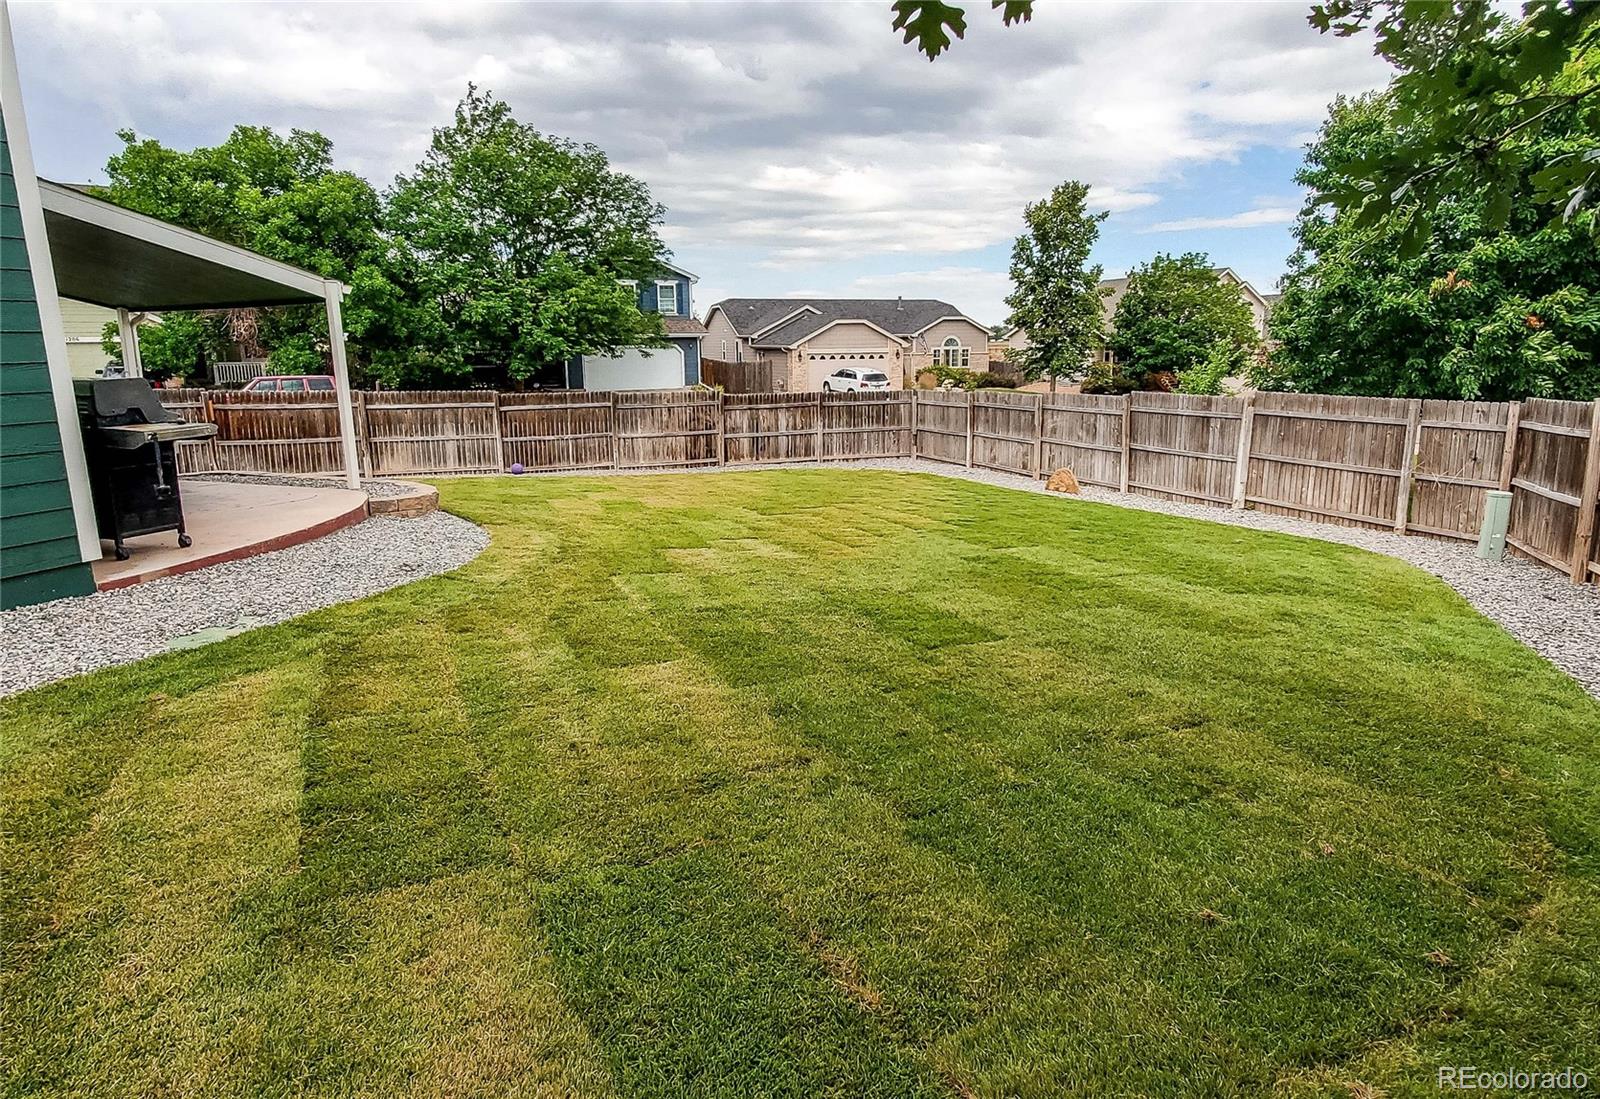 7800 12th, Greeley, CO